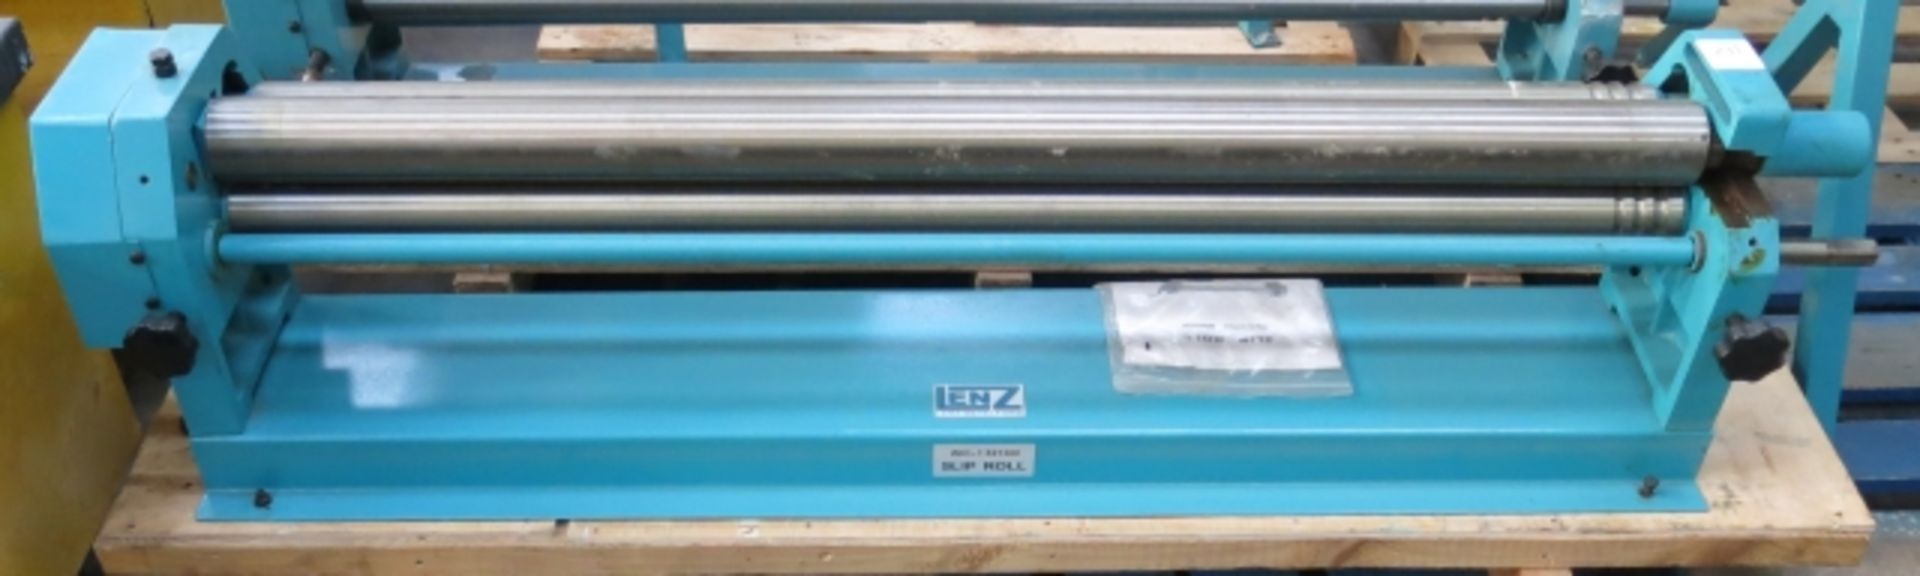 * Lenz Metalform LRM 1300 Manual Bending Rolls. New boxed overstocks. Please note there is a £5 plus